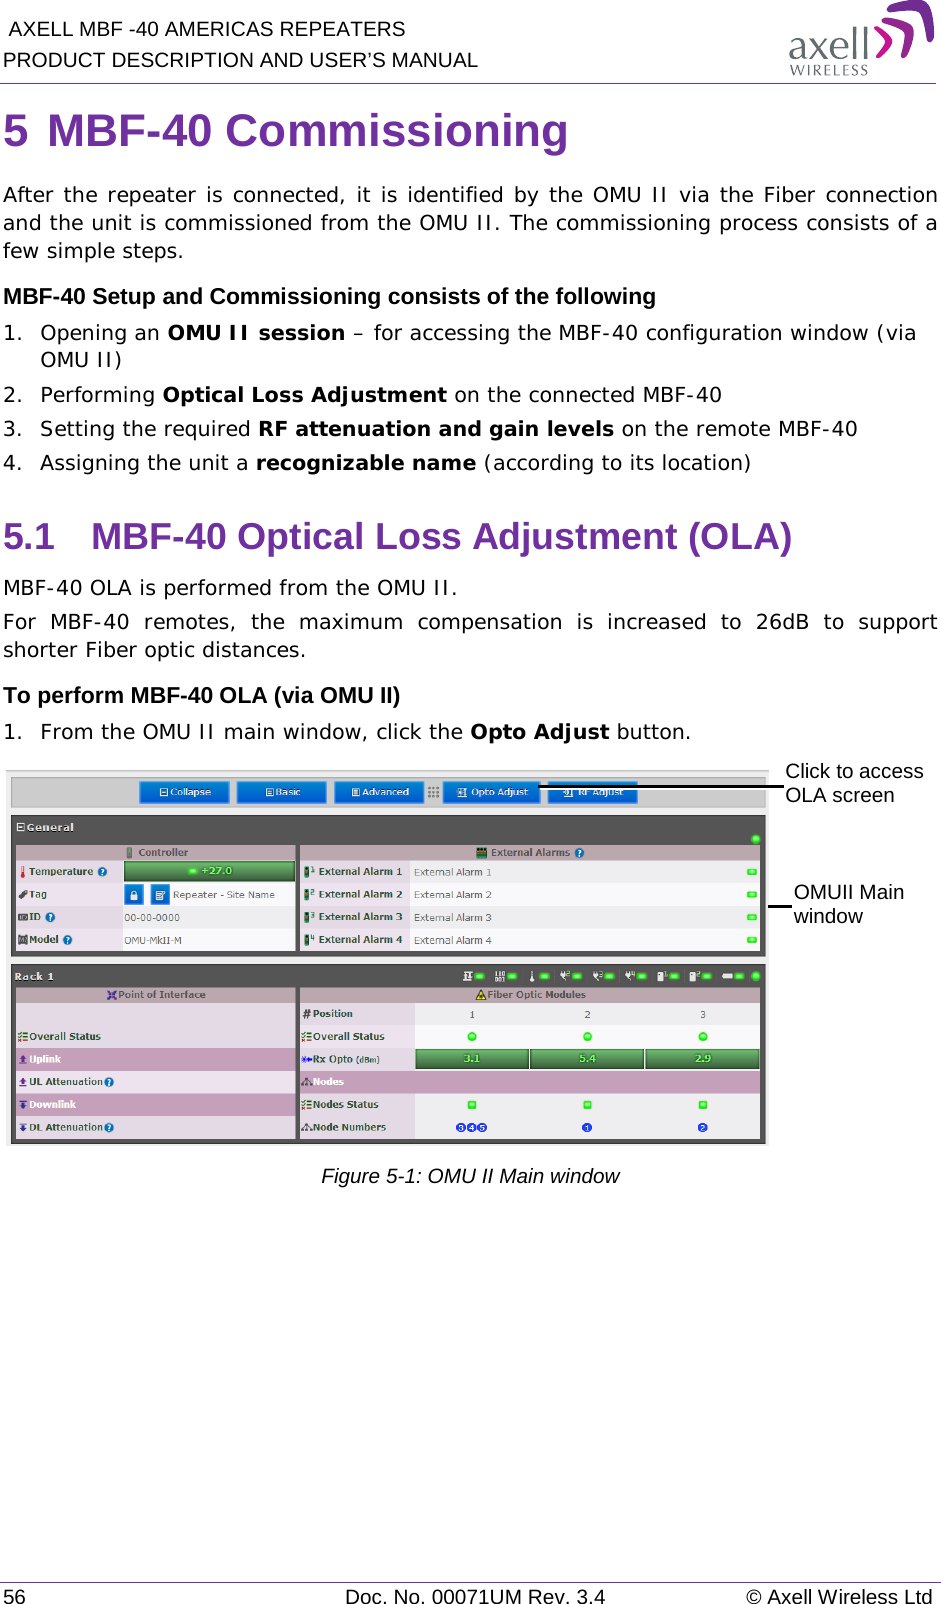  AXELL MBF -40 AMERICAS REPEATERS PRODUCT DESCRIPTION AND USER’S MANUAL 56 Doc. No. 00071UM Rev. 3.4 © Axell Wireless Ltd 5 MBF-40 Commissioning After the repeater is connected, it is identified by the OMU II via the Fiber connection and the unit is commissioned from the OMU II. The commissioning process consists of a few simple steps. MBF-40 Setup and Commissioning consists of the following 1.  Opening an OMU II session – for accessing the MBF-40 configuration window (via OMU II) 2.  Performing Optical Loss Adjustment on the connected MBF-40 3.  Setting the required RF attenuation and gain levels on the remote MBF-40 4.  Assigning the unit a recognizable name (according to its location) 5.1  MBF-40 Optical Loss Adjustment (OLA) MBF-40 OLA is performed from the OMU II. For MBF-40 remotes, the maximum compensation is increased to 26dB to support shorter Fiber optic distances. To perform MBF-40 OLA (via OMU II) 1.  From the OMU II main window, click the Opto Adjust button.  Figure  5-1: OMU II Main window   Click to access OLA screen OMUII Main window 